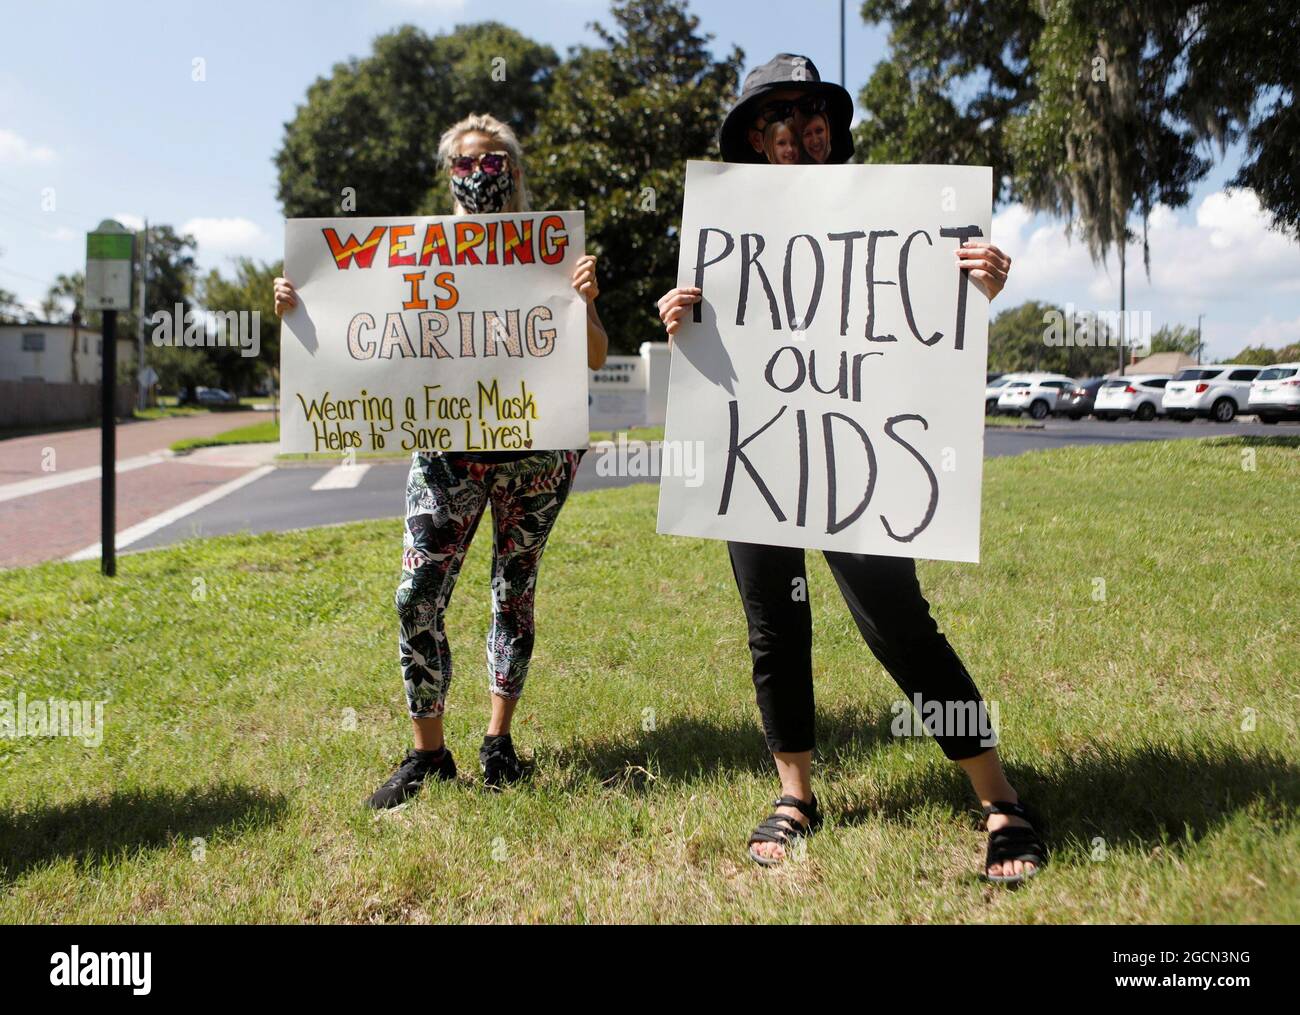 Supporters of wearing masks in schools protest before the special called school board workshop at the Pinellas County Schools Administration Building in Largo, Florida, U.S., August 9, 2021. REUTERS/Octavio Jones Stock Photo